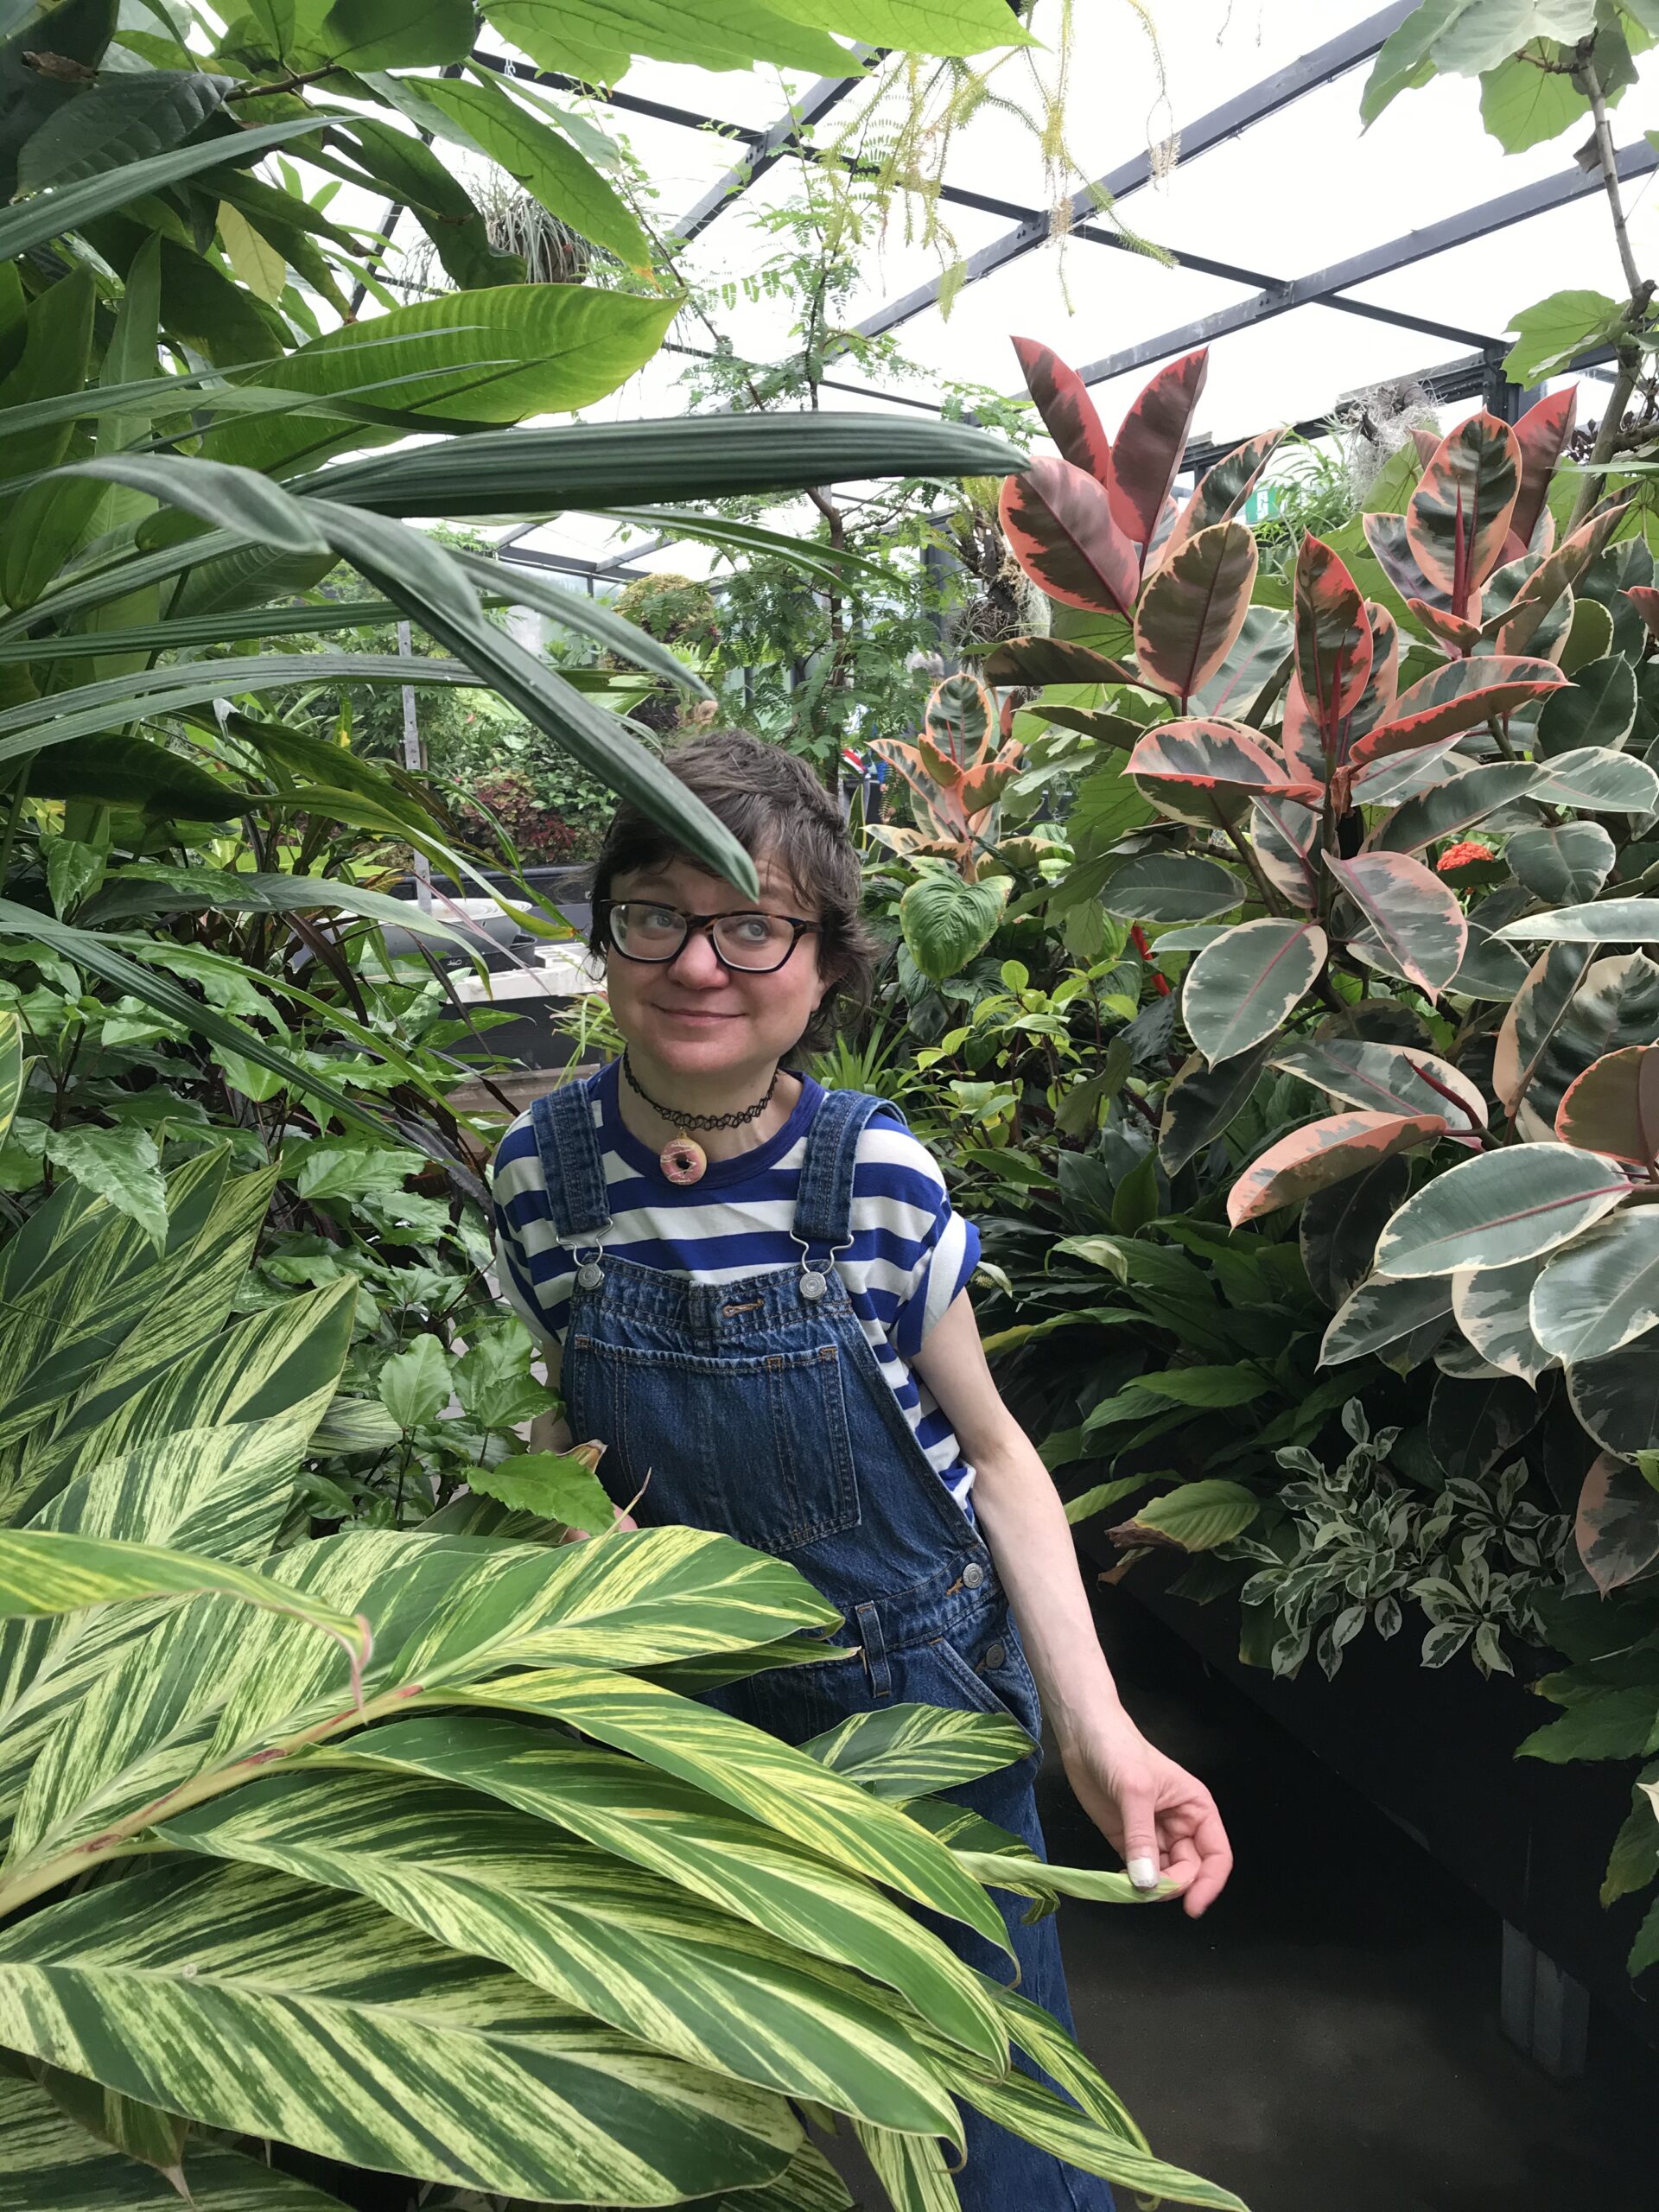 Portrait photograph of Jessica Knight, who is pictured smiling cheekily whilst looking off to the side of the frame, from behind and between several lush leafy green plants in a covered space that might be a nursery. Jess has light skin and short brown hair, and wears dark brown spectacles, a choker necklace with a donut-shaped pendant, a striped blue and white tee rolled up at the sleeves, and blue denim overalls. With her left hand she is lightly pinching a leaf of a plant in front of her